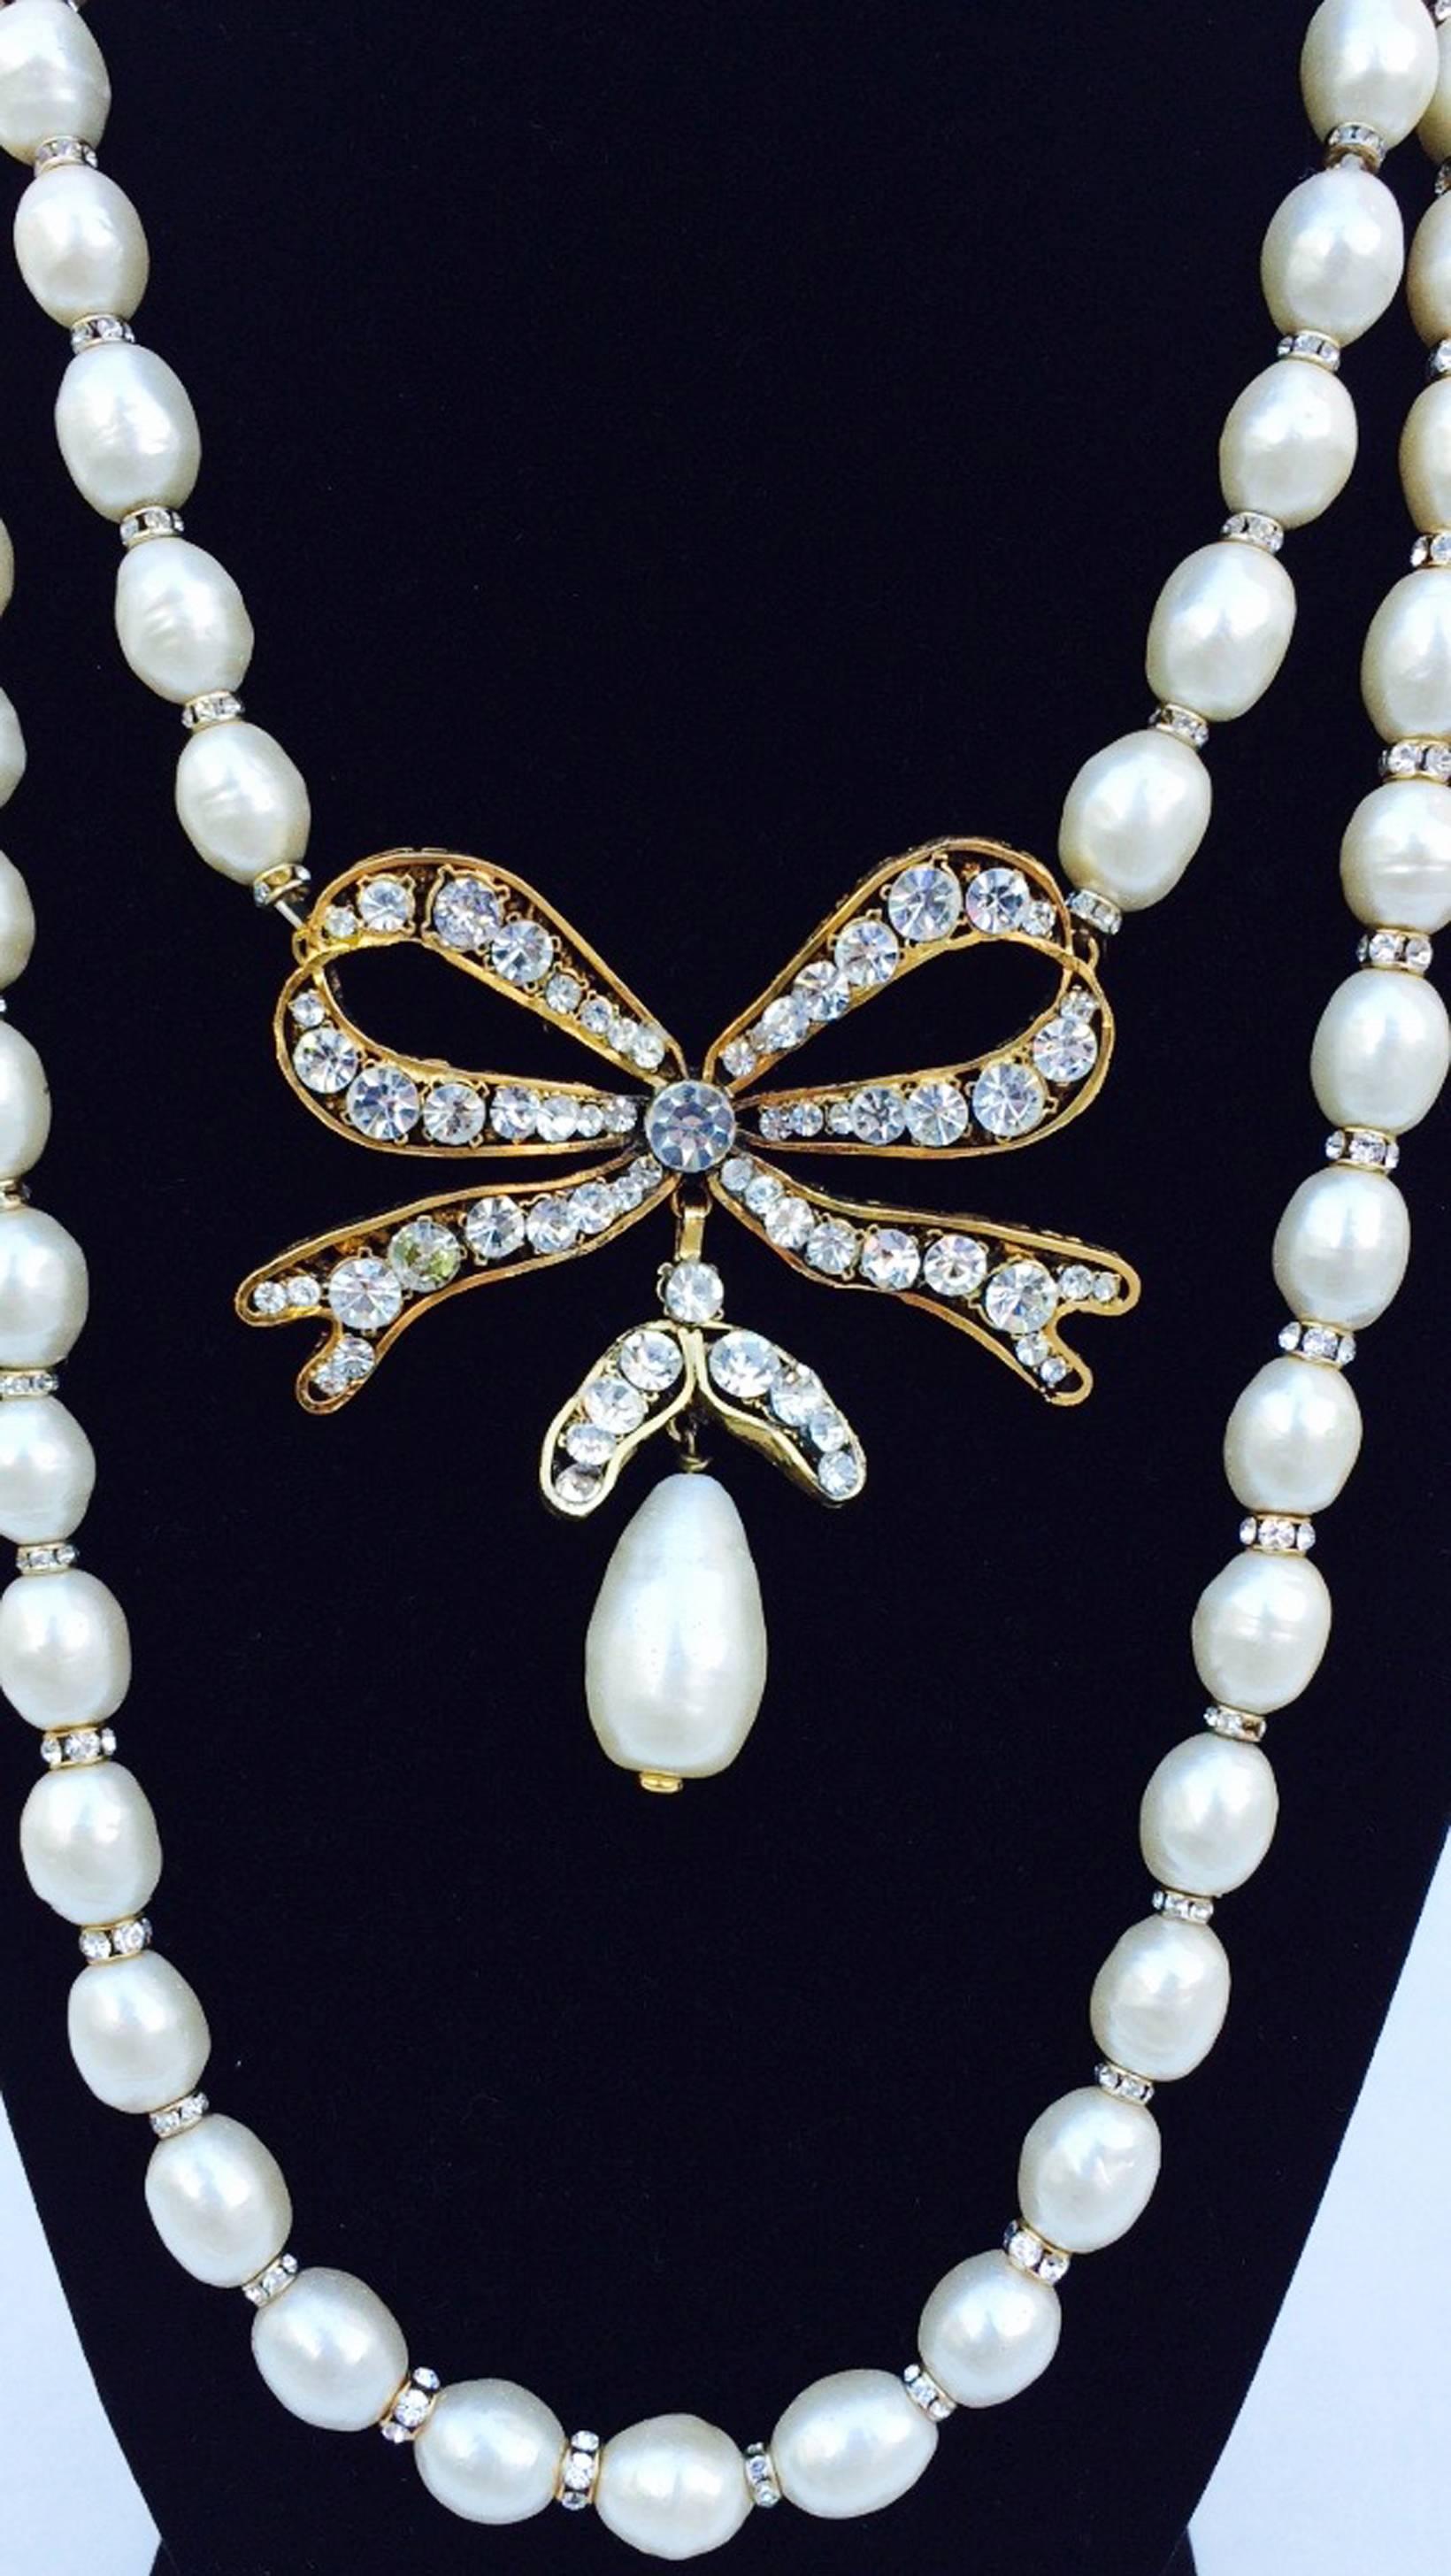 Women's Chanel Pearl and Crystal Pendant Necklace 1980s